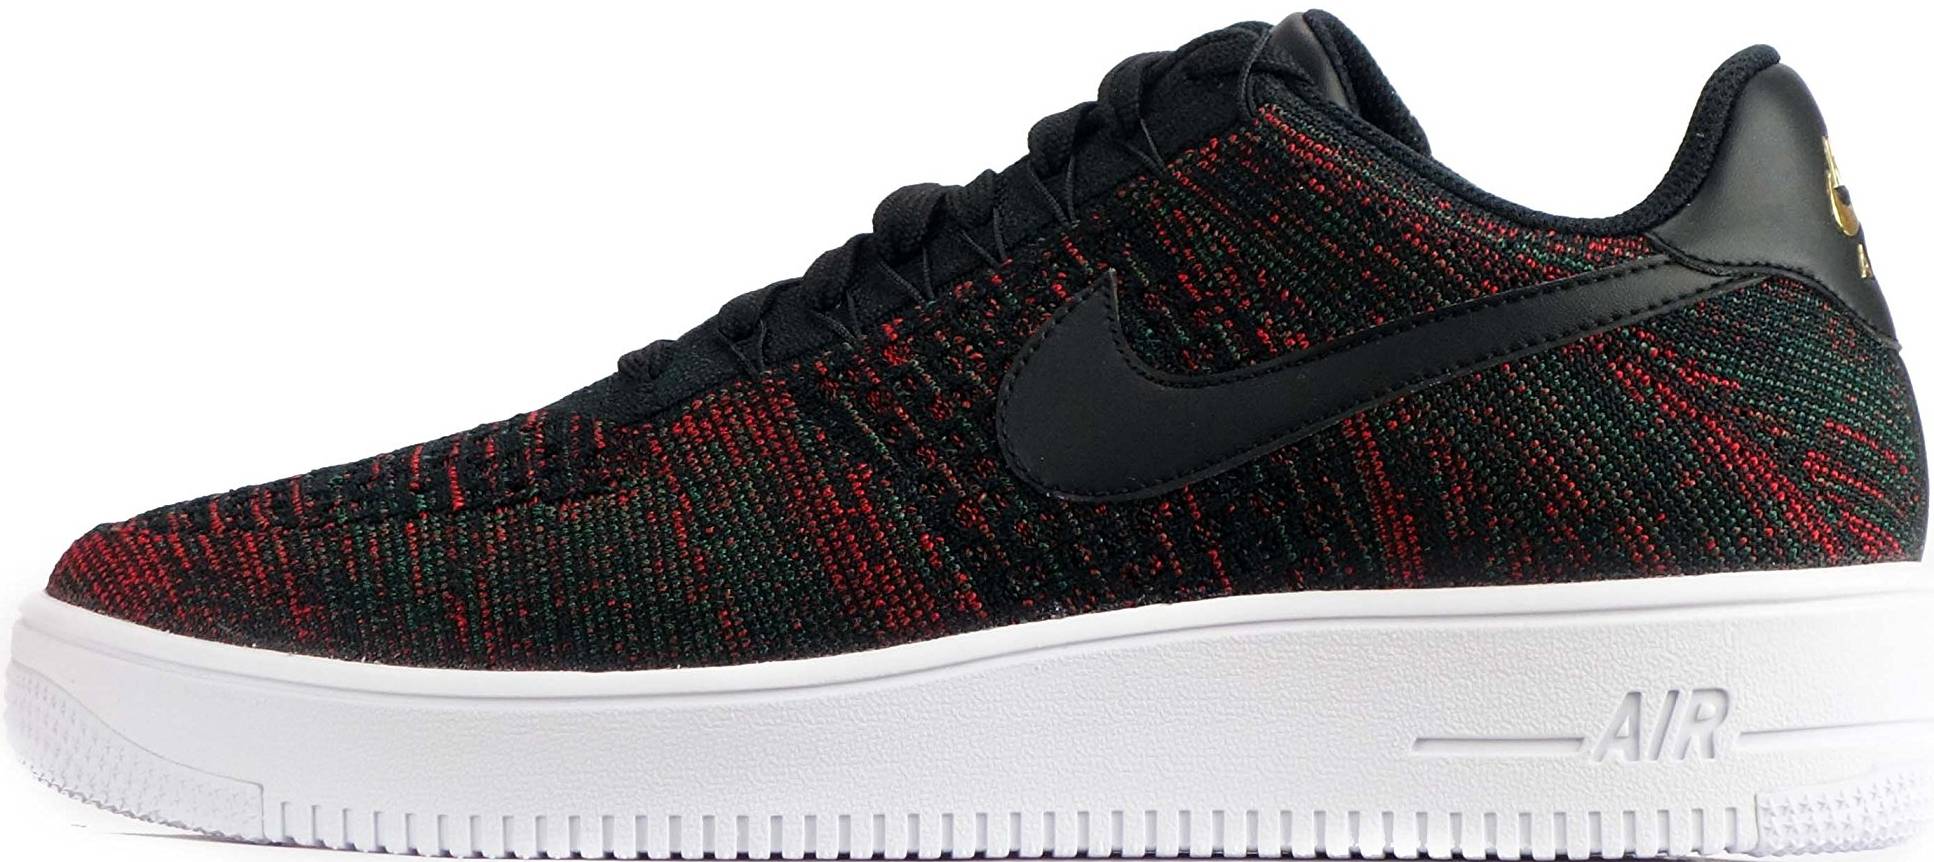 Expired Round down Children Center Nike Air Force 1 Ultra Flyknit Low sneakers in one color (only $93) |  RunRepeat